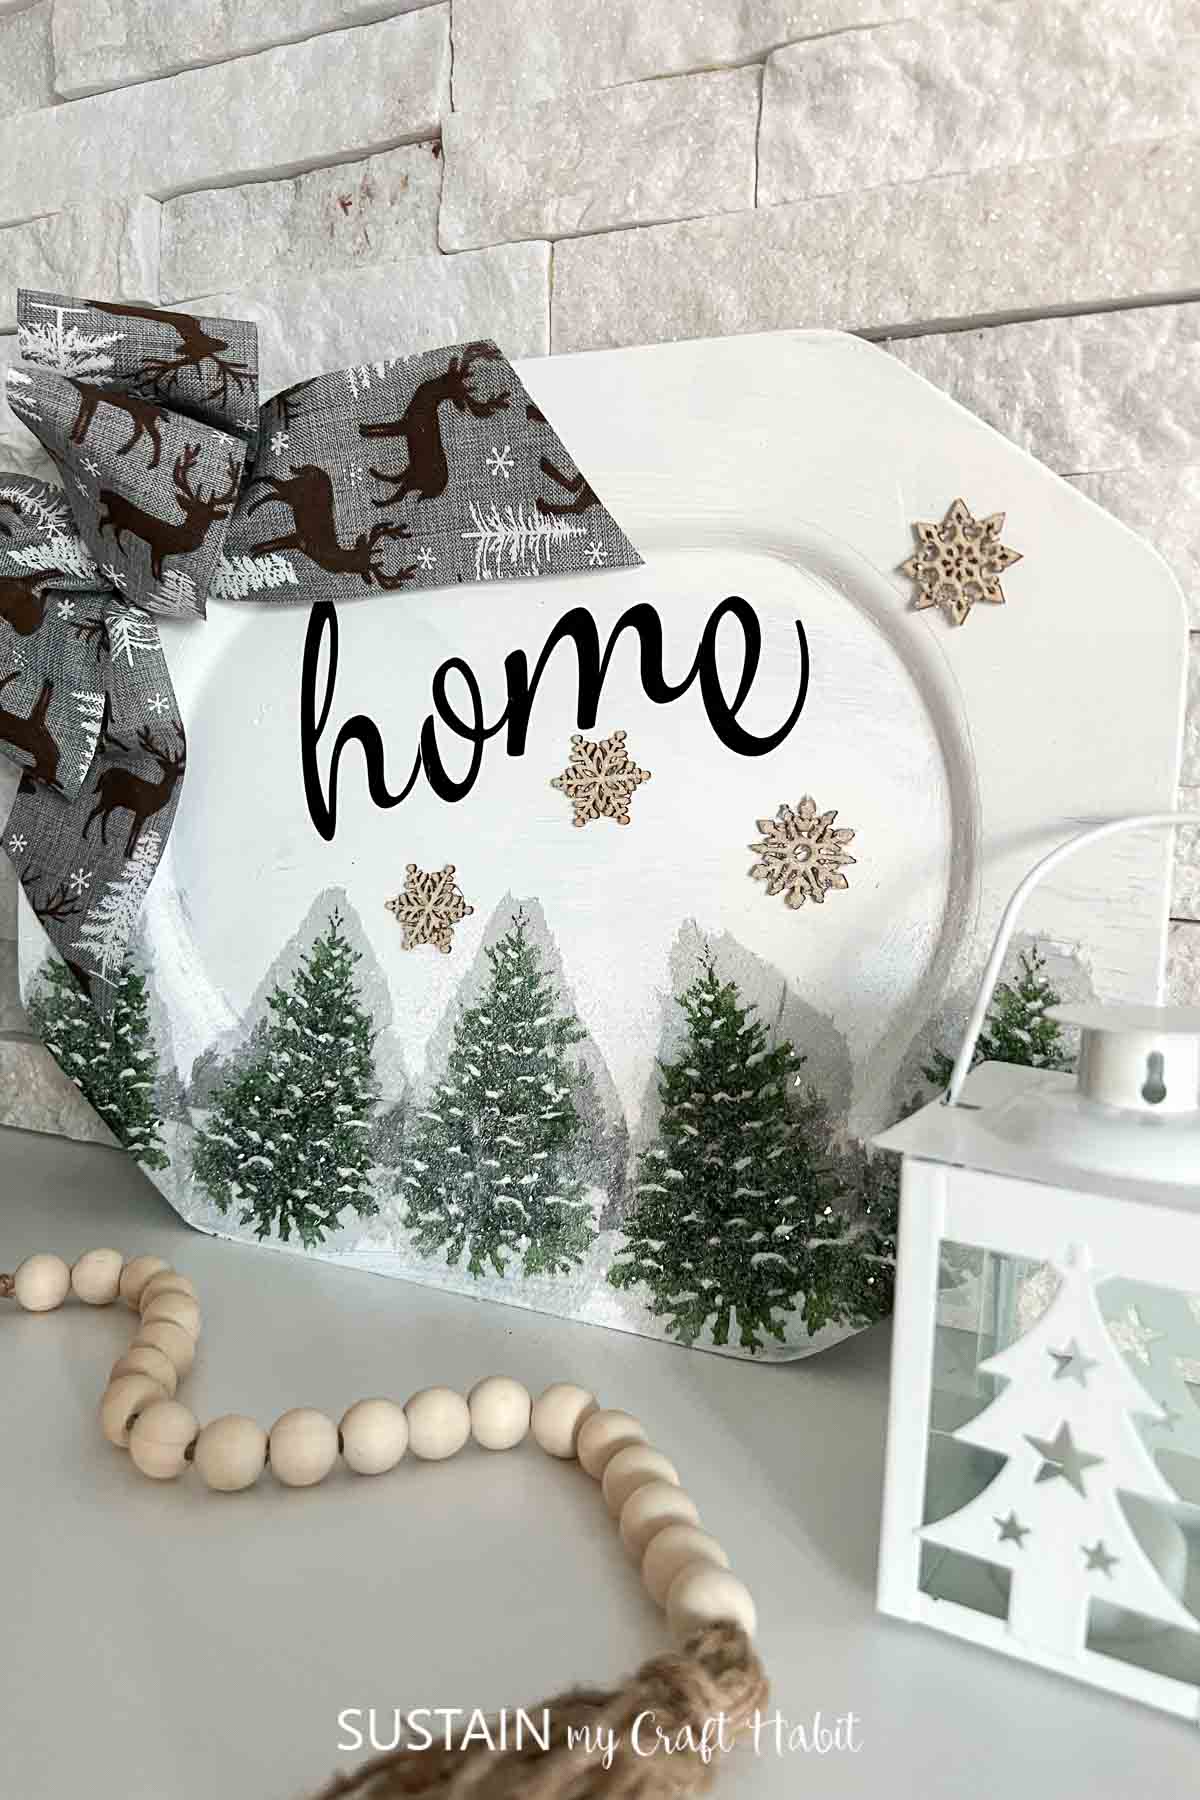 Upcycled home sign made from a platter and decorated with ribbon, snowflakes, napkins and glitter.